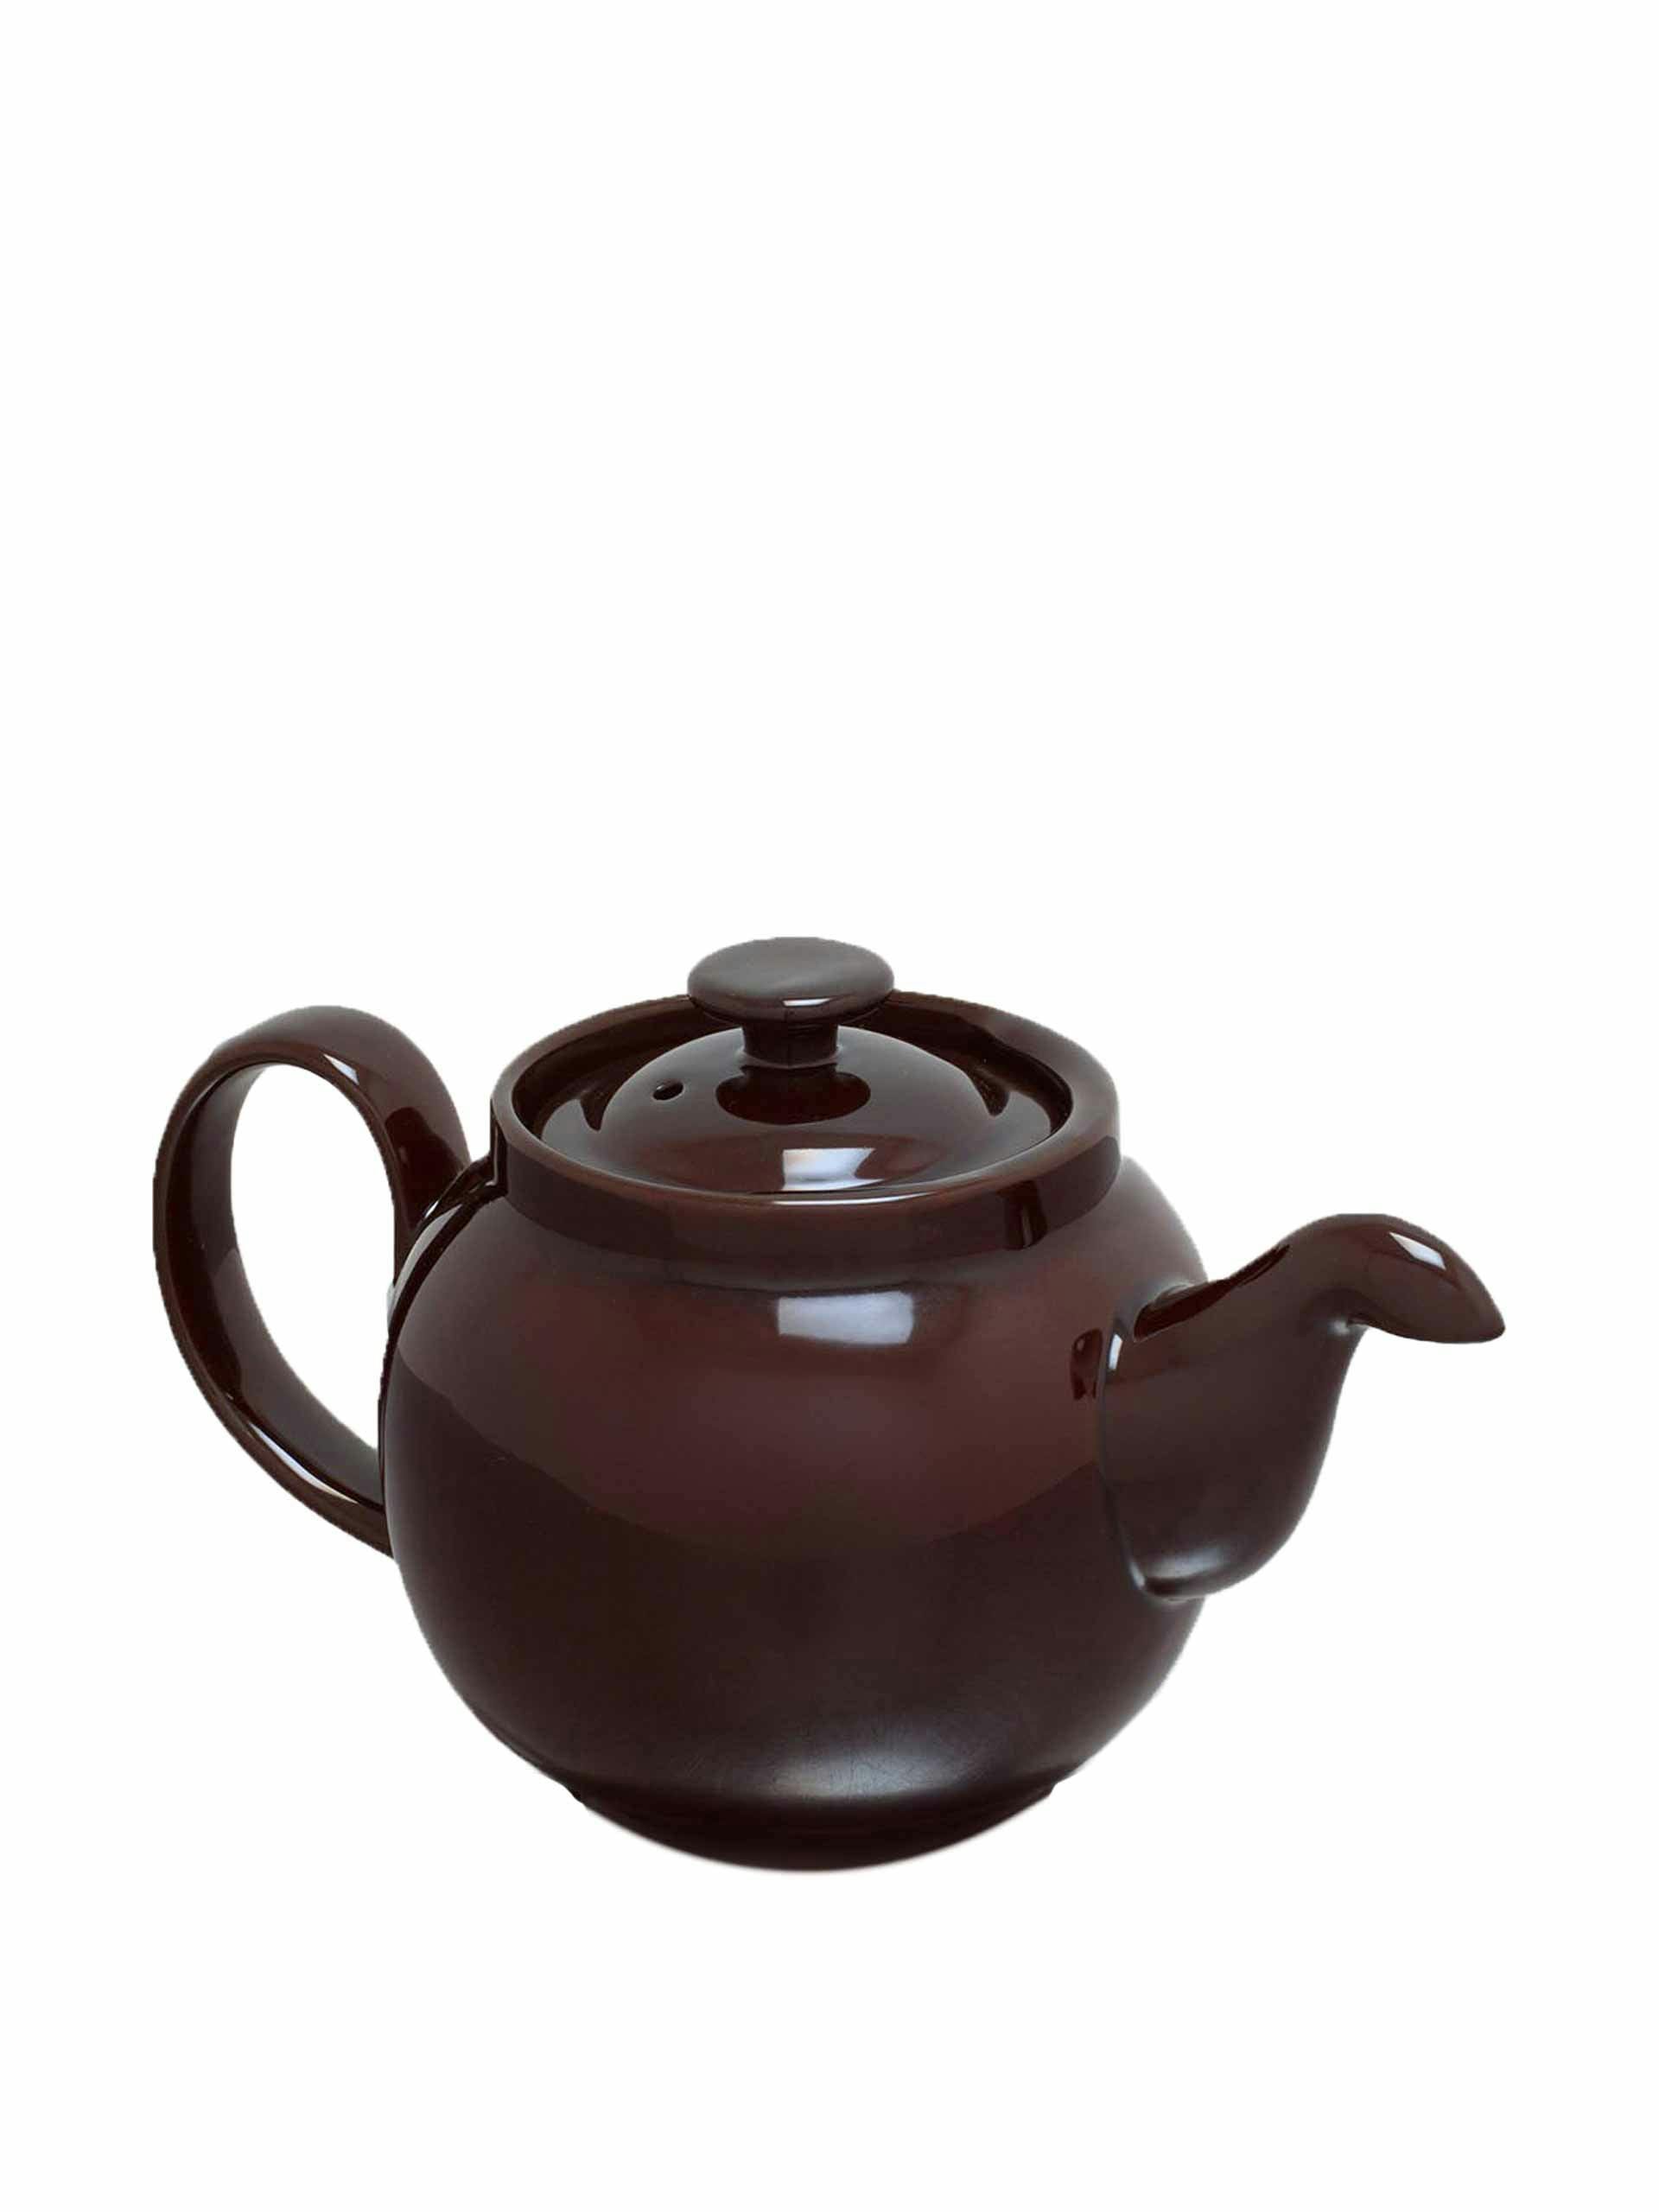 Re-engineered brown betty teapot